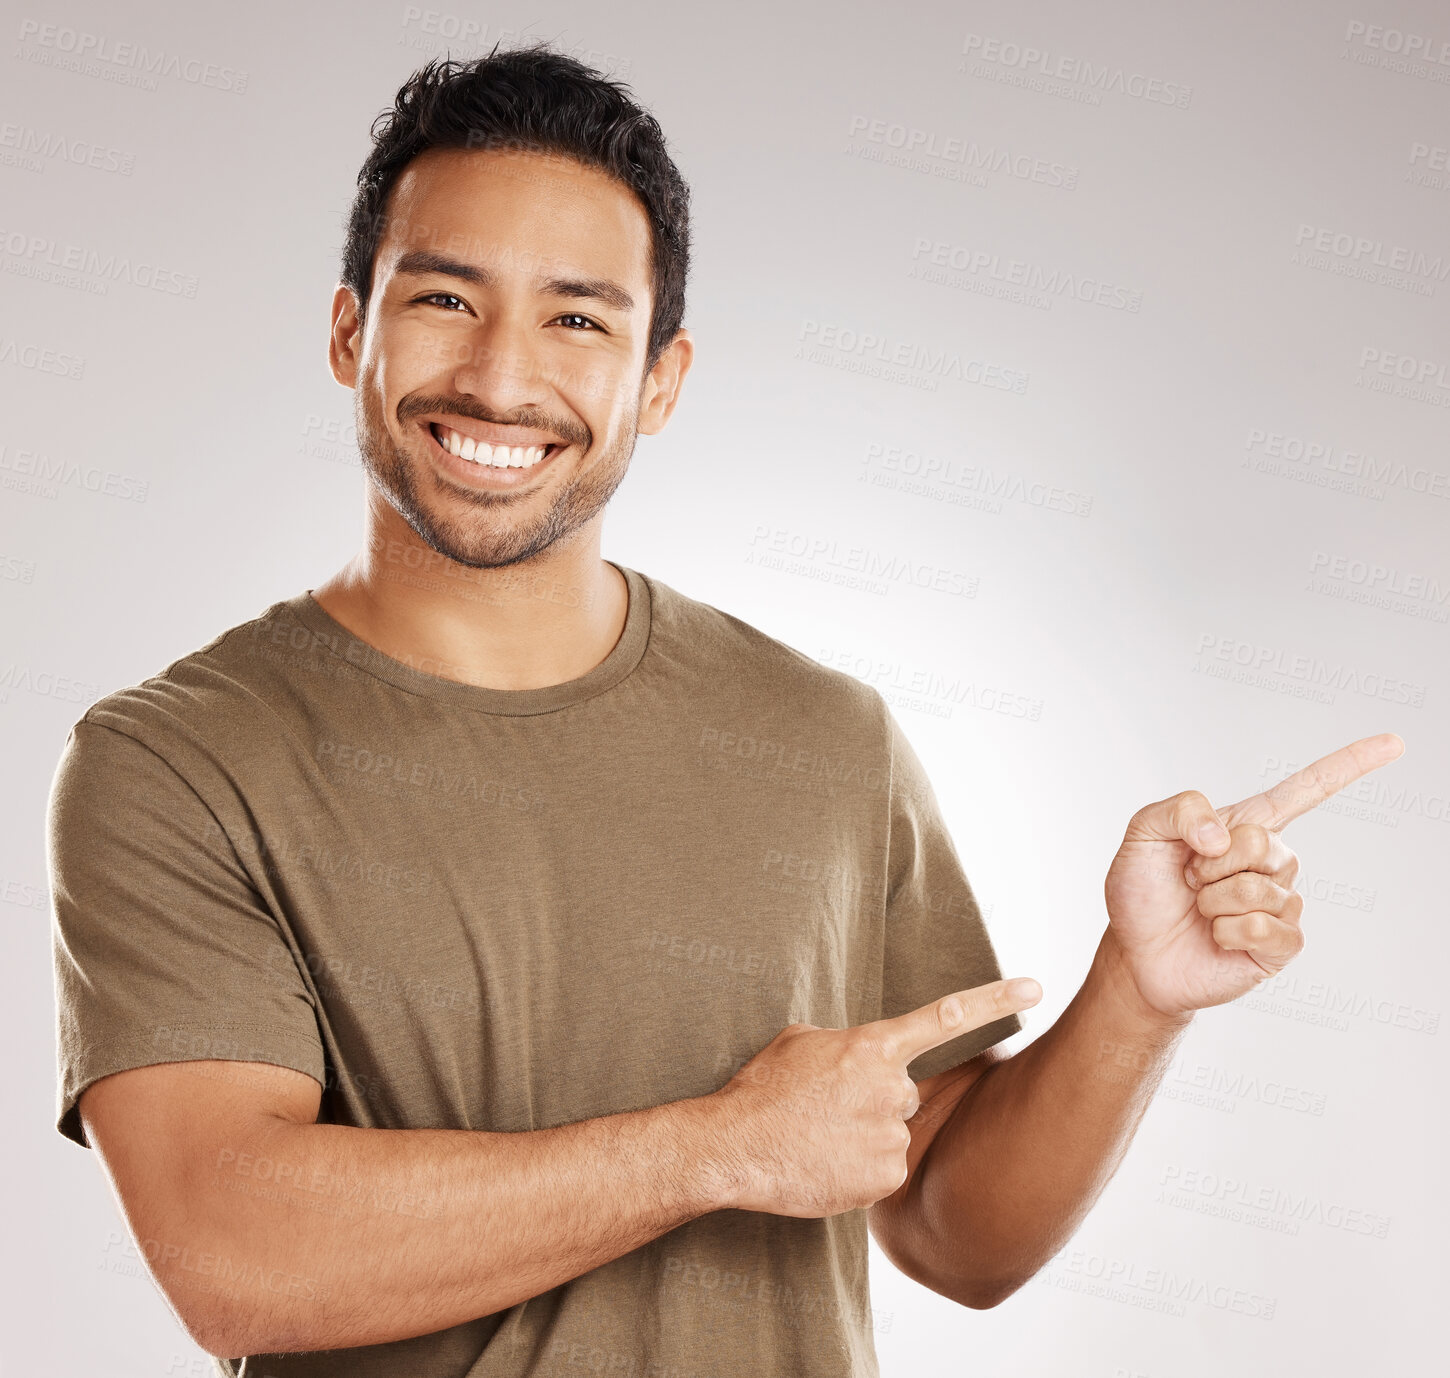 Buy stock photo Handsome young mixed race man pointing towards copyspace while standing in studio isolated against a grey background. Happy hispanic male advertising or endorsing your product, company or idea